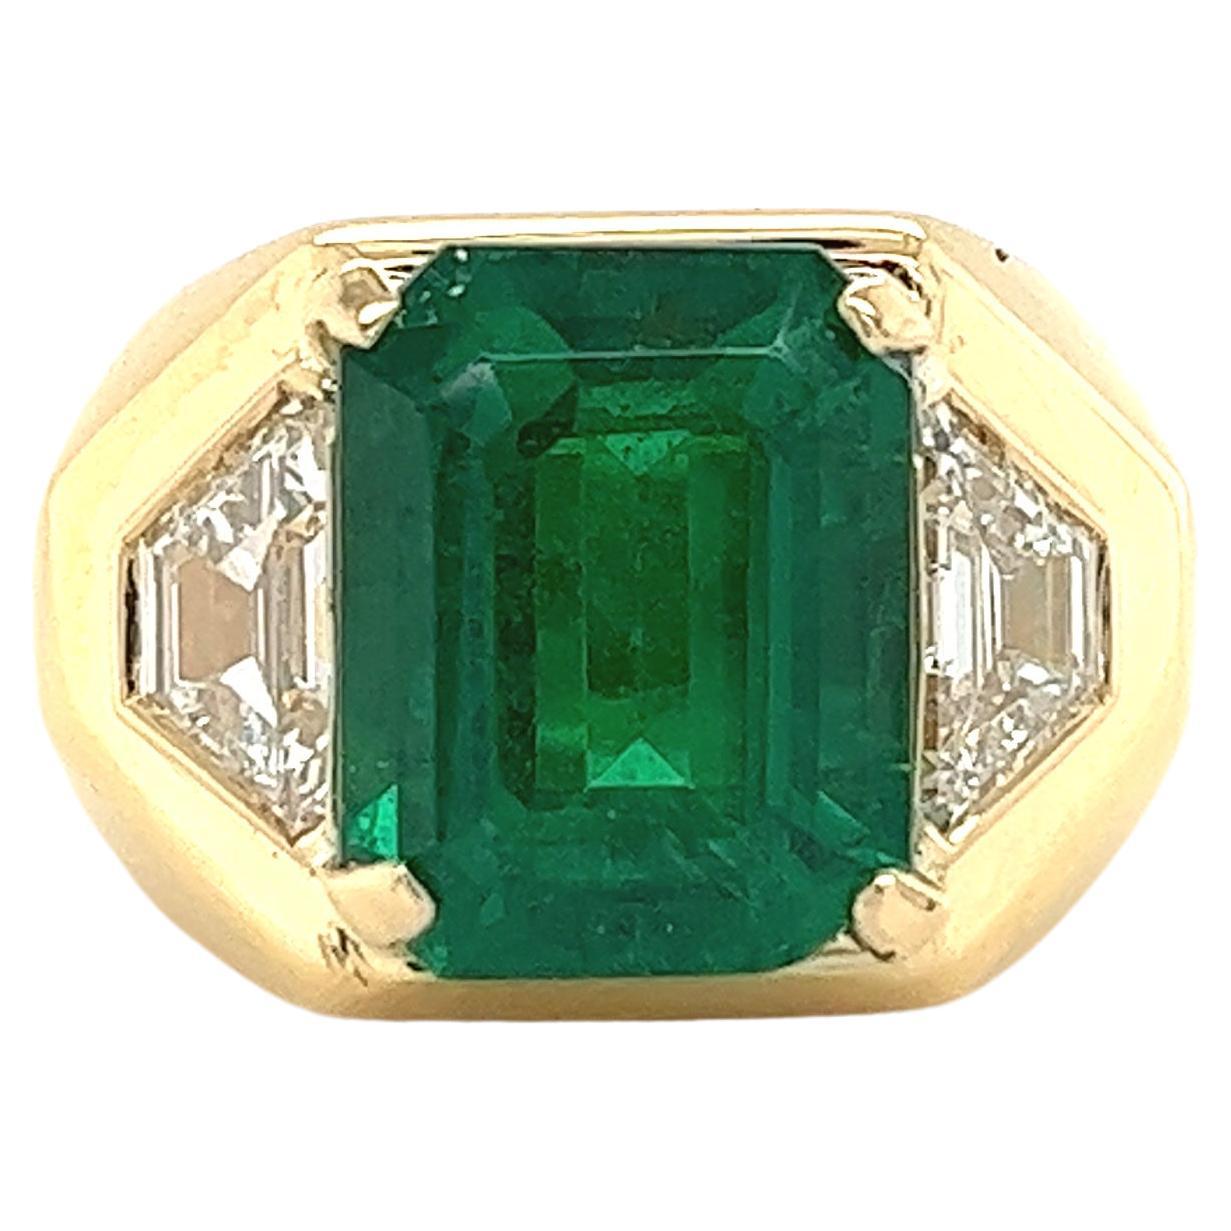 AGL Certified 5.40 Carat Emerald Minor Oil with Trapezoid Diamond 18k Gold Ring